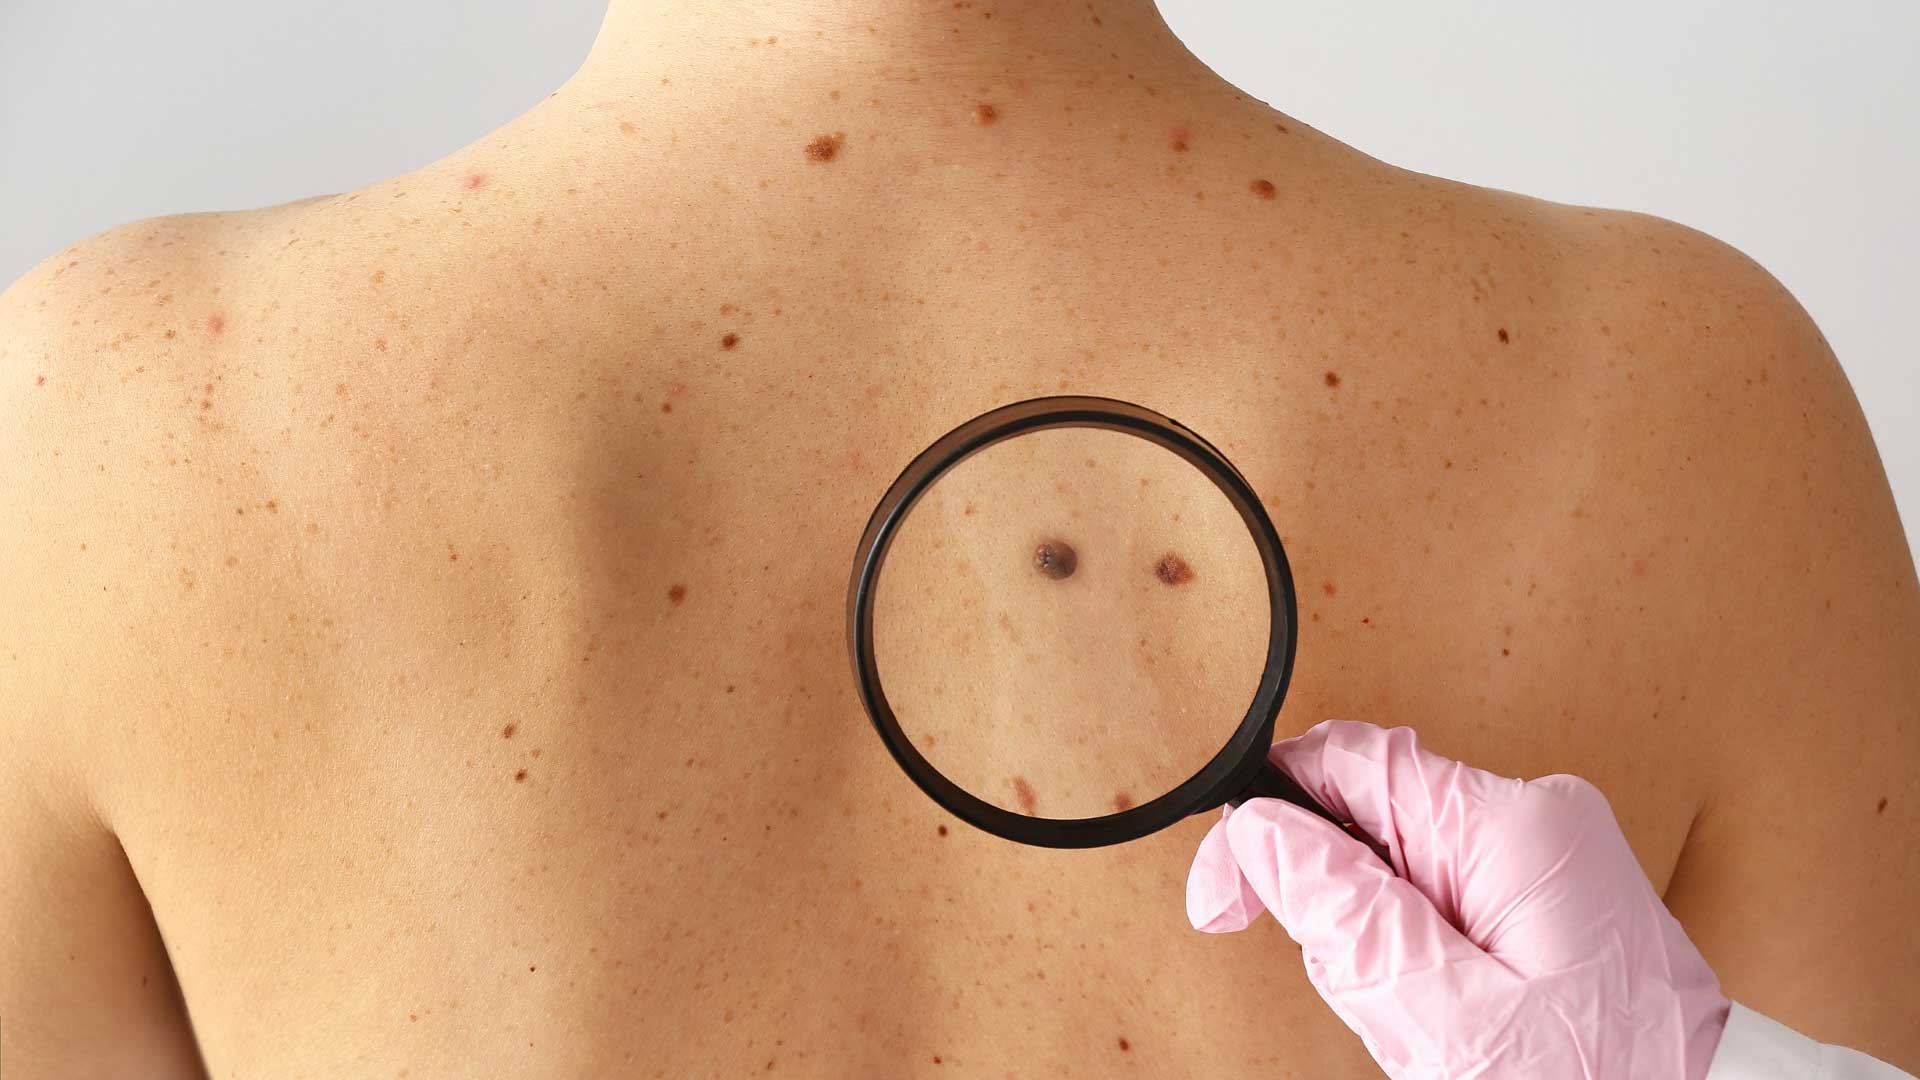 Dr. Dino Prato of Envita Medical Centers Shares His Opinion with Business Times on Skin Cancer Myths